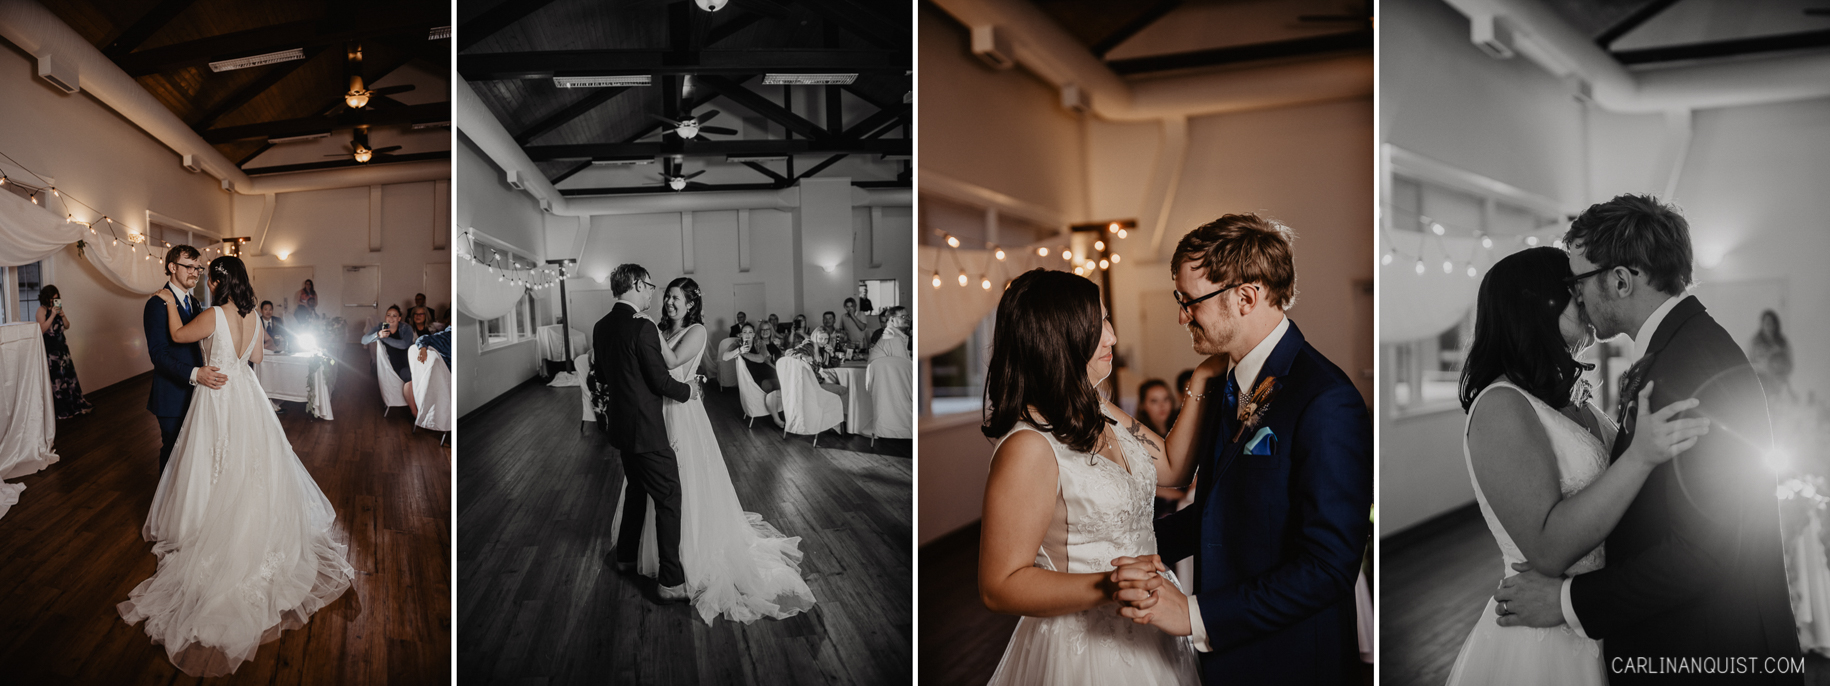 Frist Dance | Bowness Scout Hall Wedding